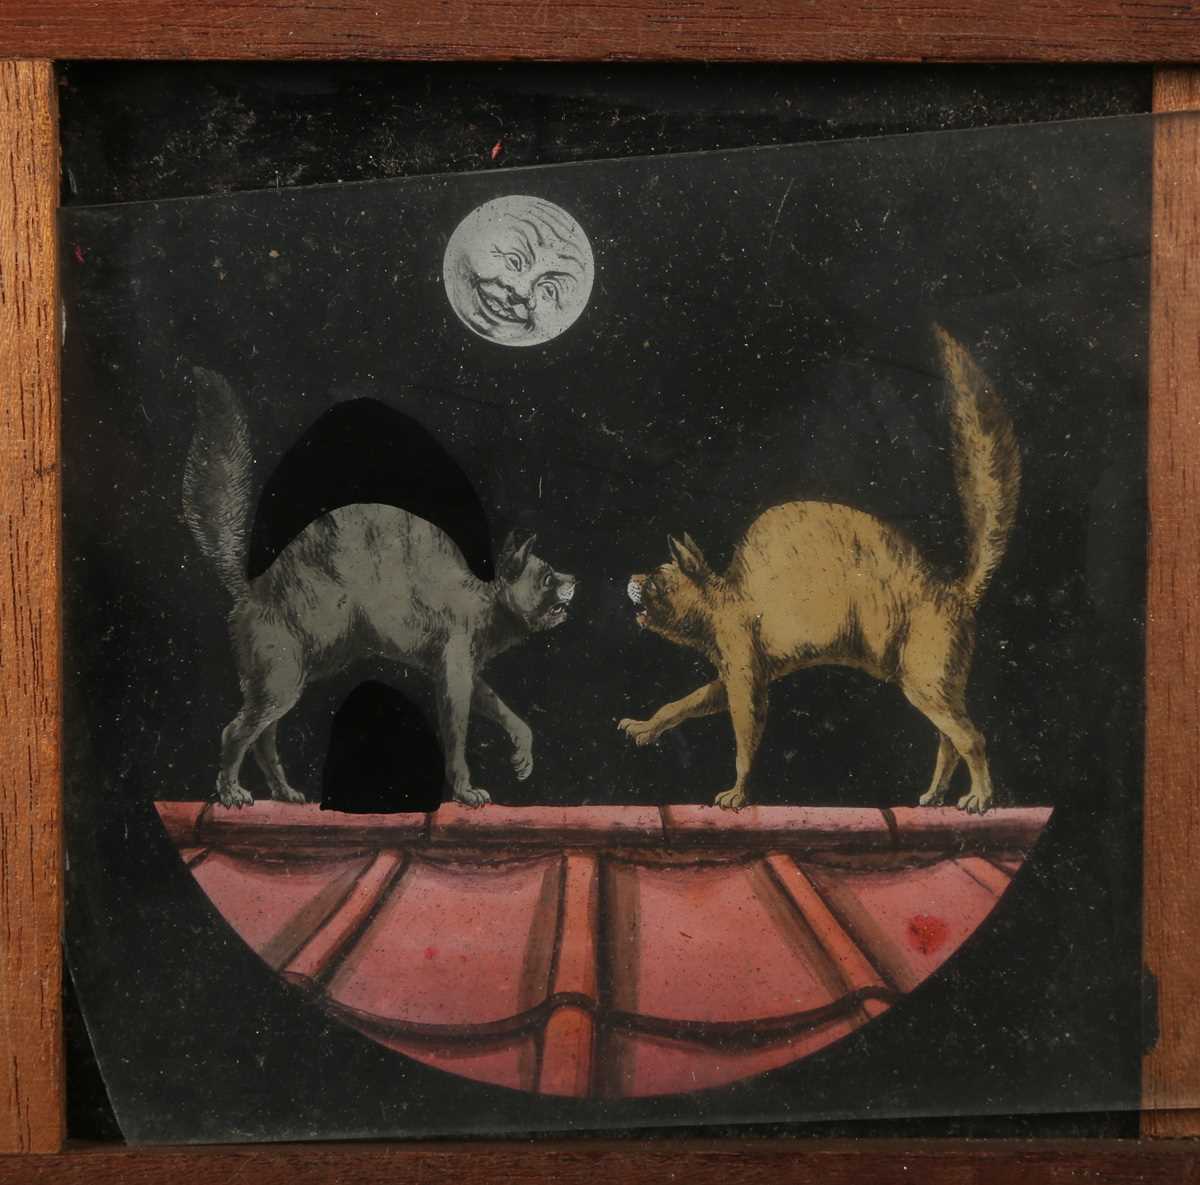 PHOTOGRAPHS. A magic lantern slide of two cats, slide 8.5cm x 8.5 cm, together with a collection